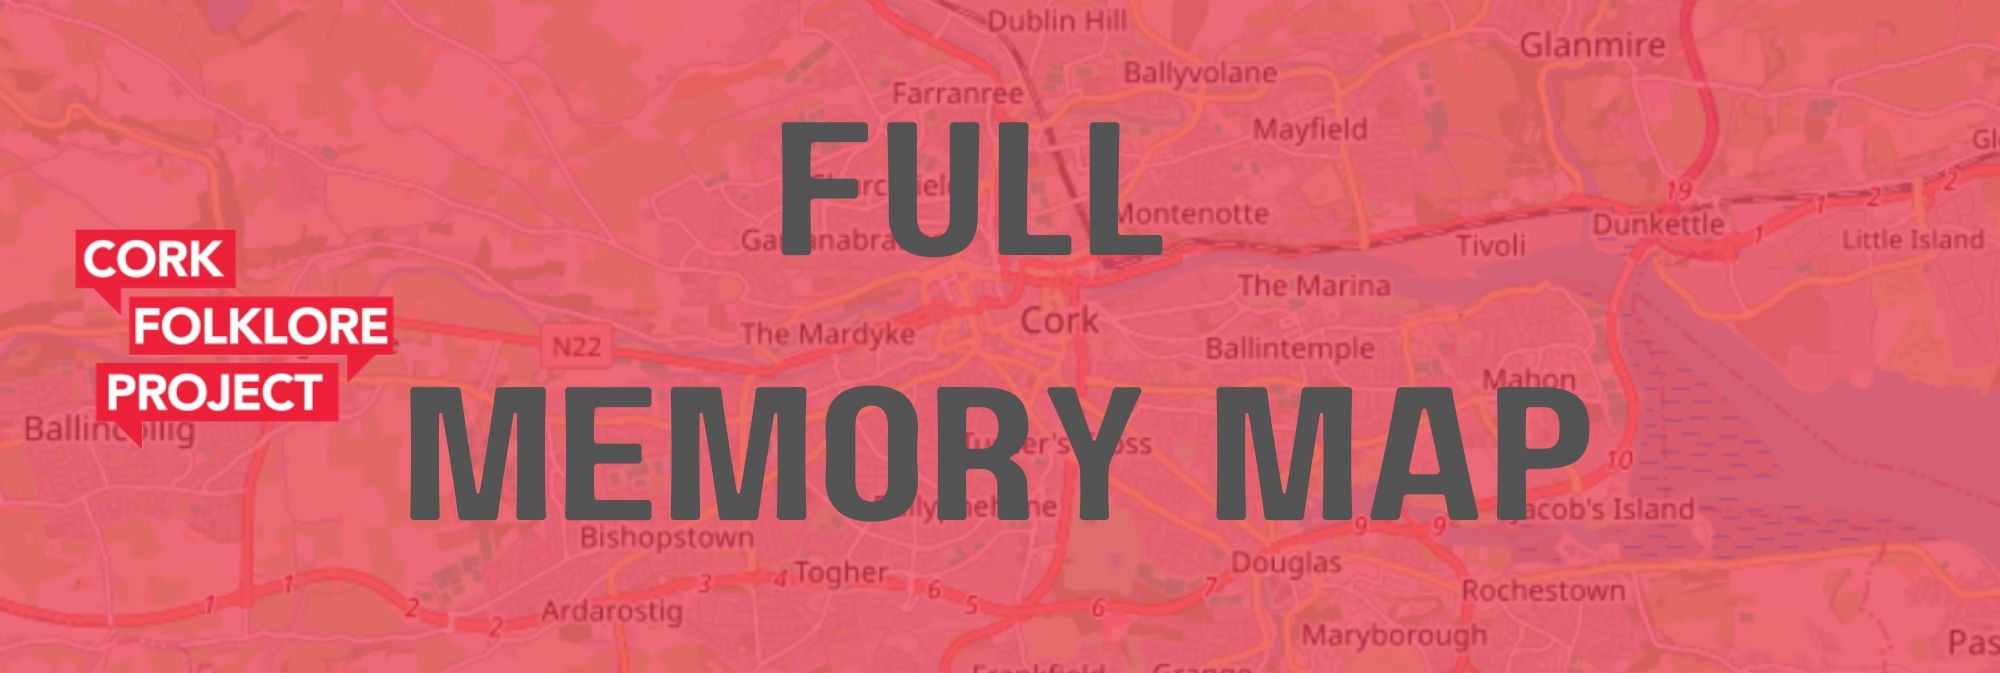 Cork Folklore Project Full Memory Map